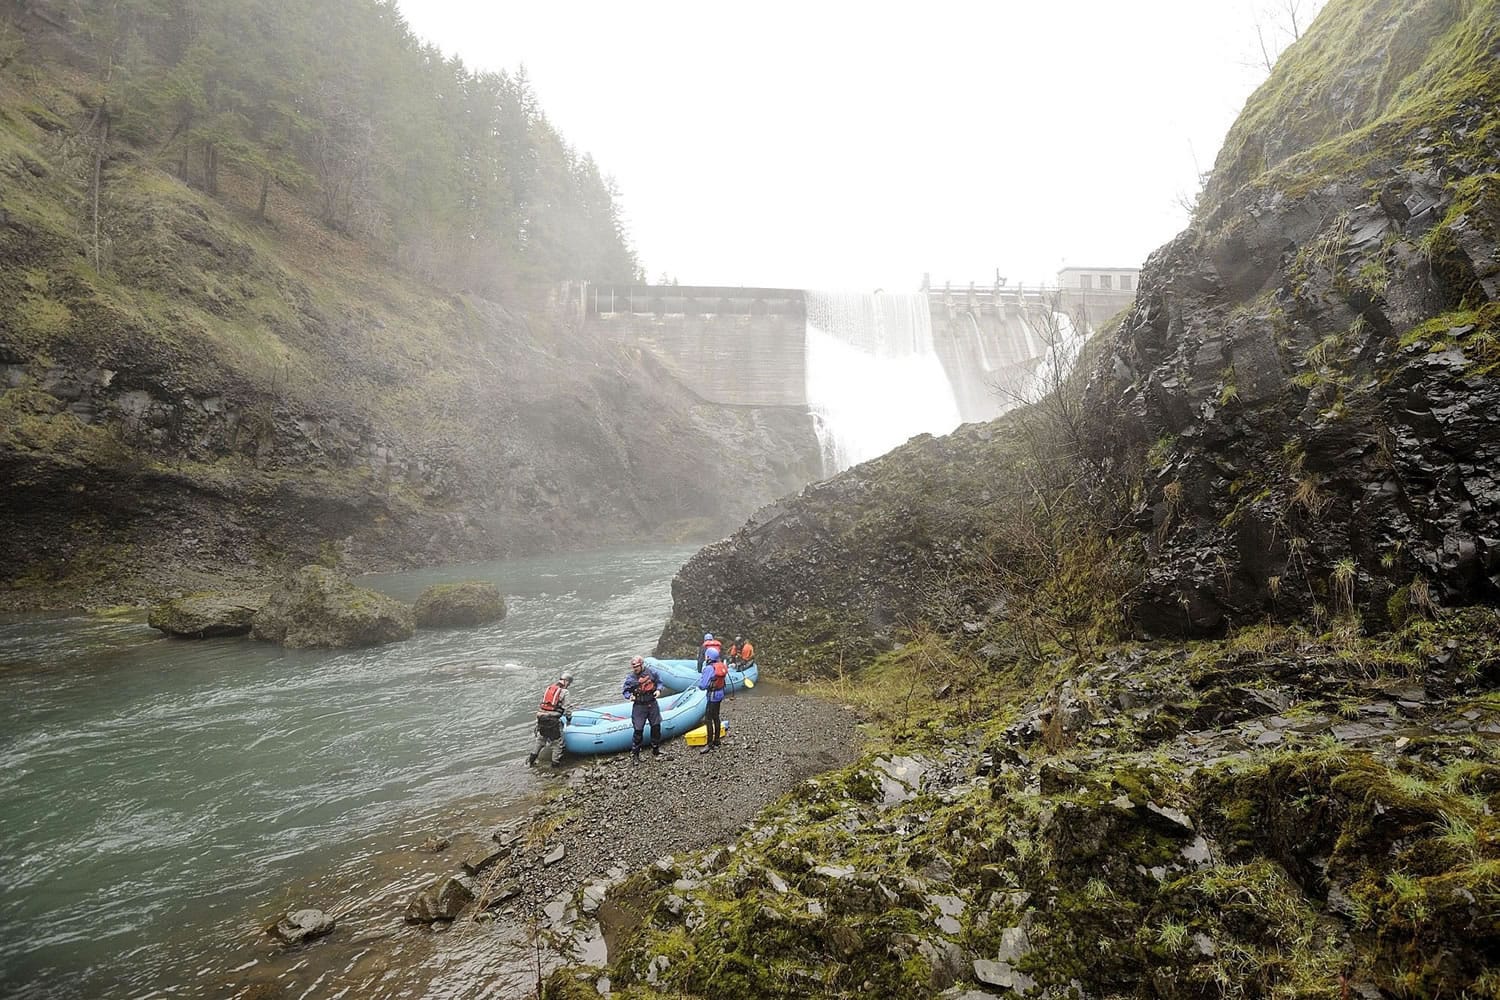 Rafters prepare to embark on a float trip down the lower White Salmon River below Condit Dam in March.